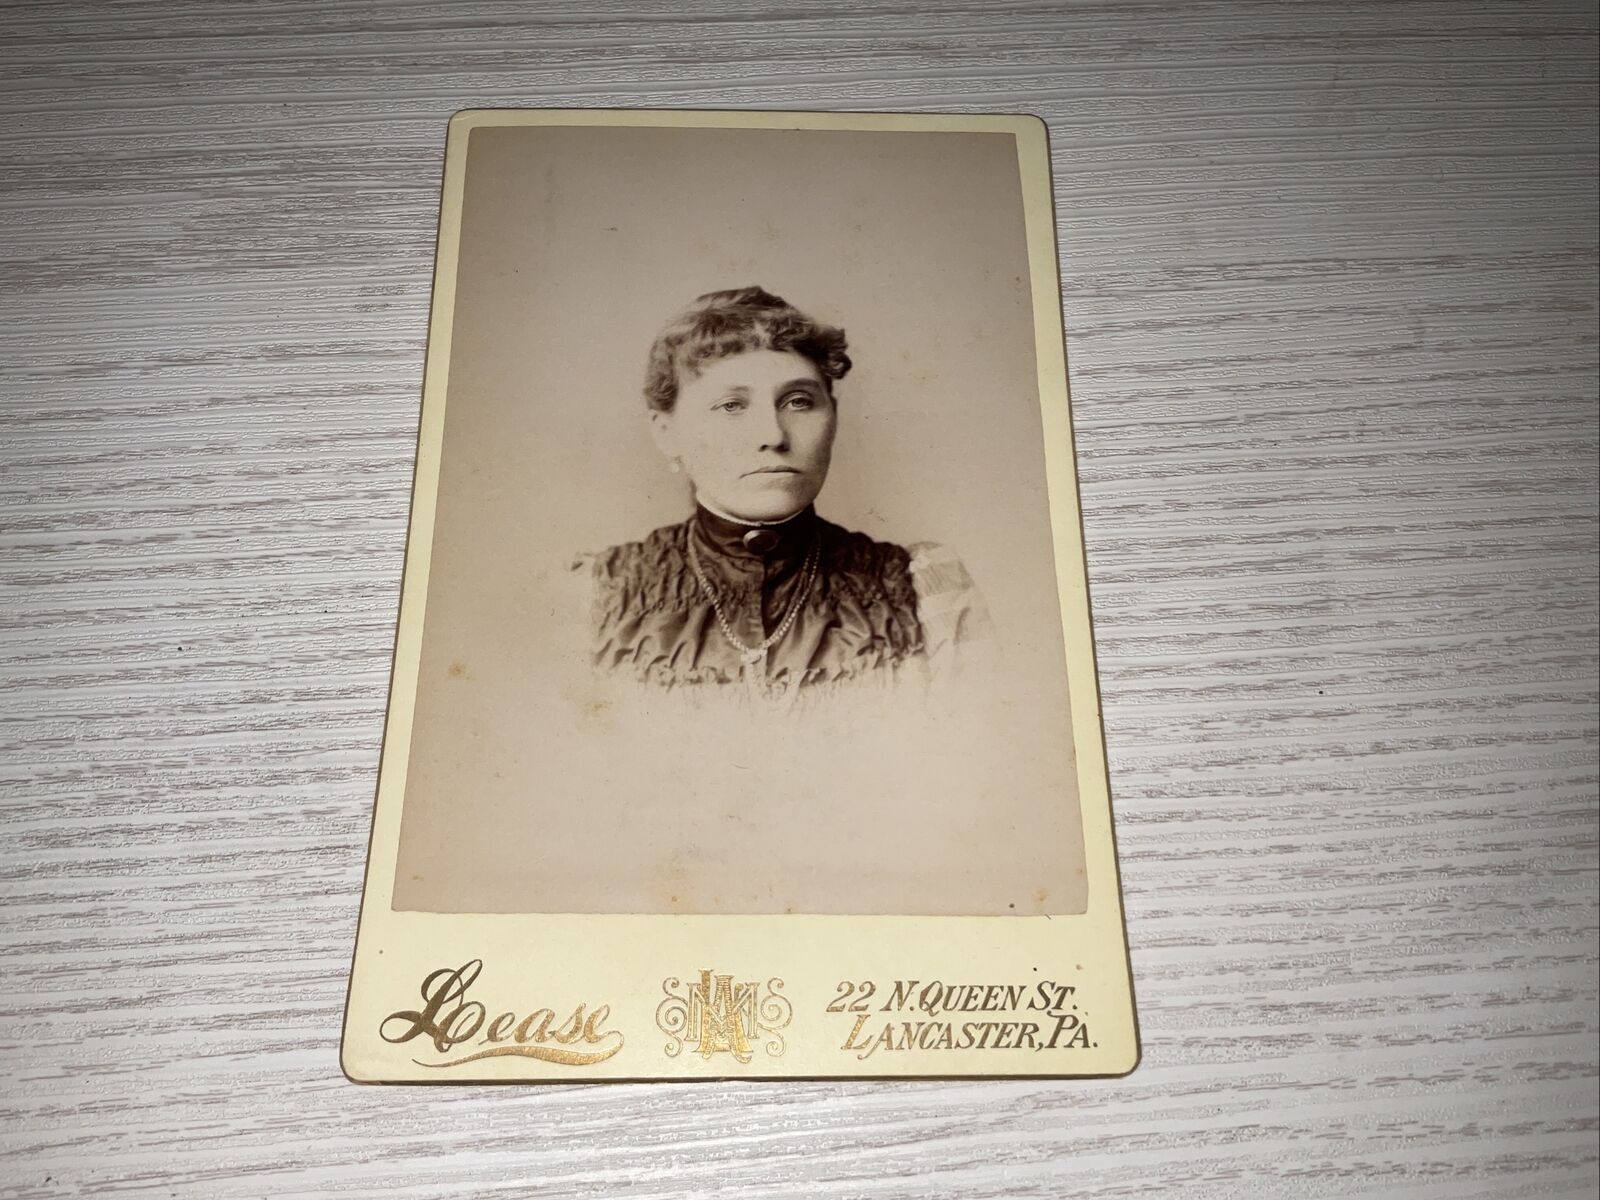 CIRCA 1890s CABINET CARD LEASE GORGEOUS YOUNG LADY IN DRESS LANCASTER PA ANTIQUE